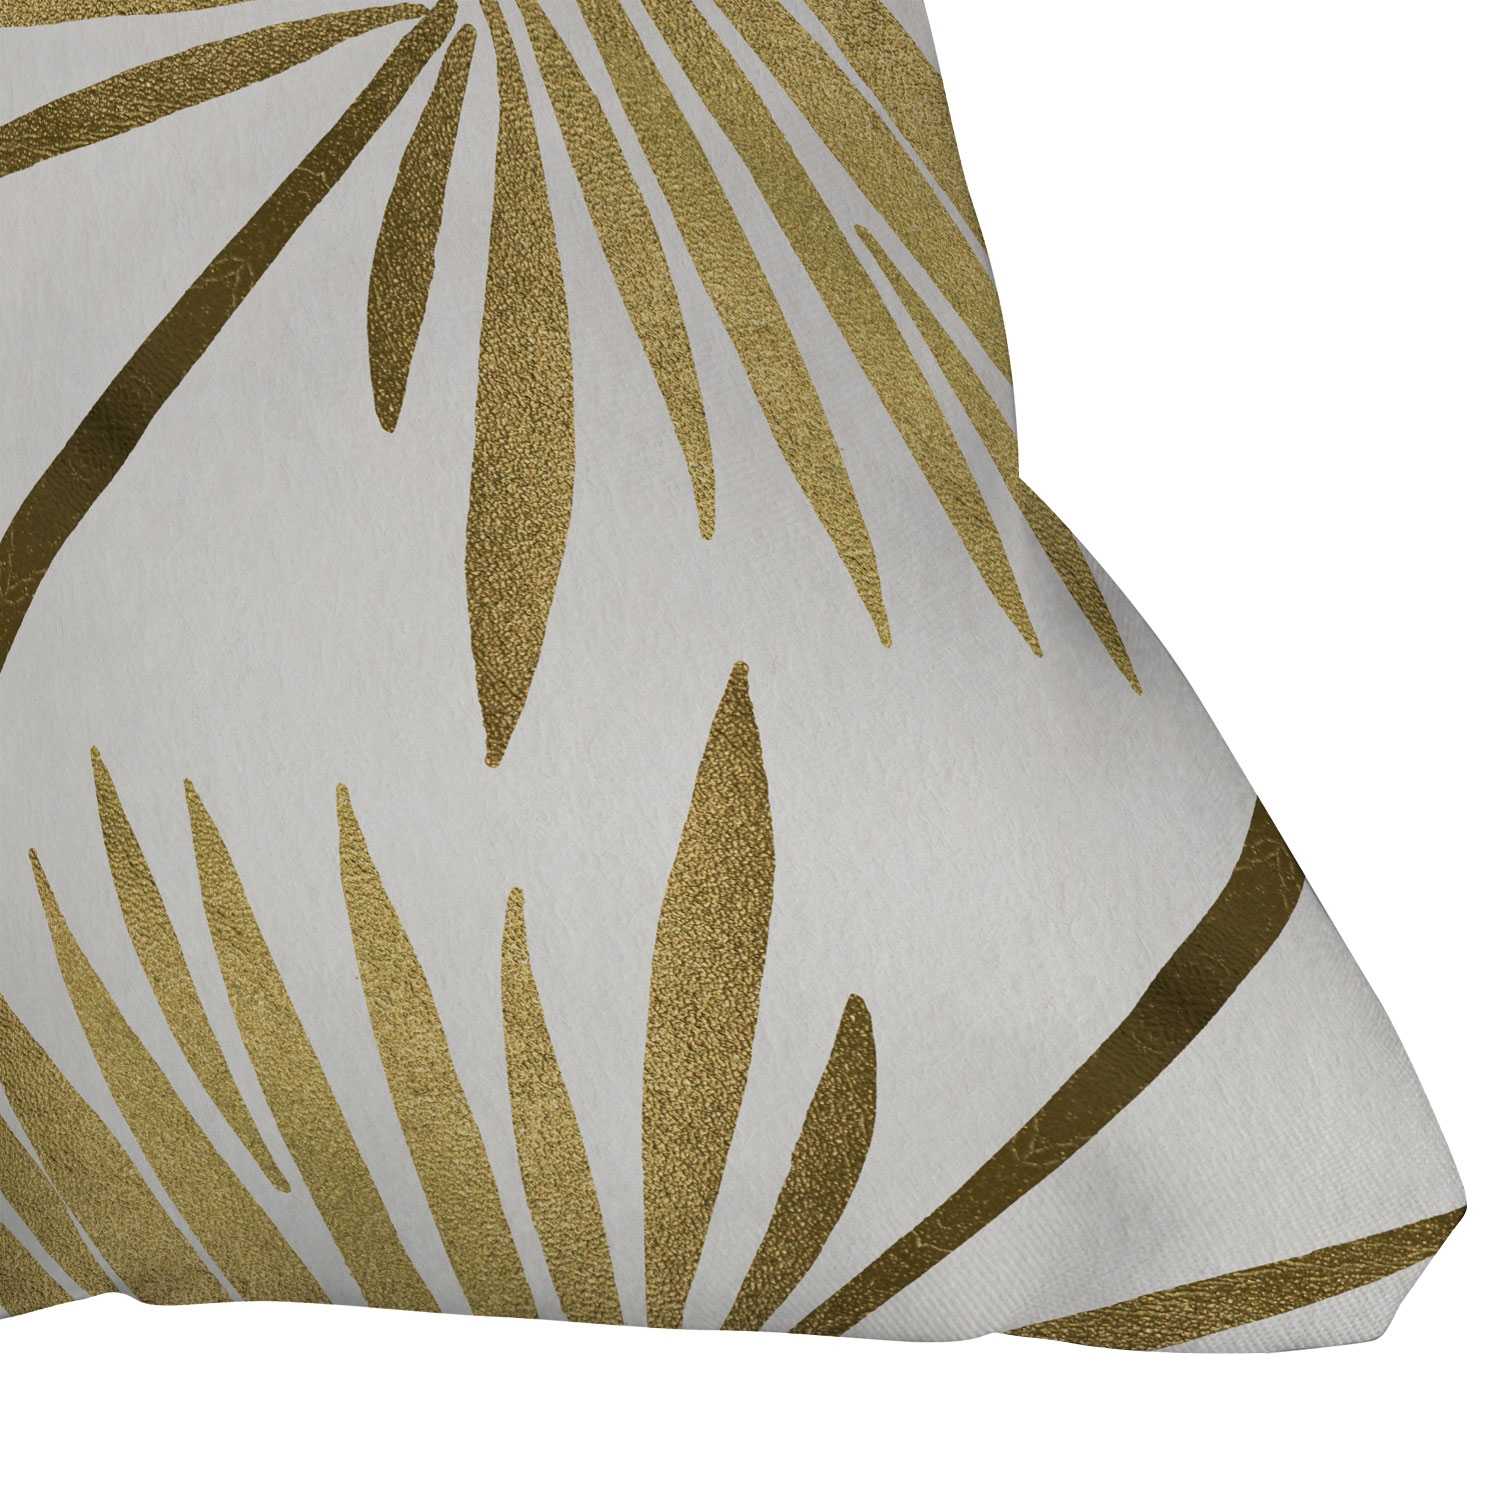 Tropical Fan Palm Gold Pattern by Cat Coquillette - Outdoor Throw Pillow 18" x 18" - Image 1